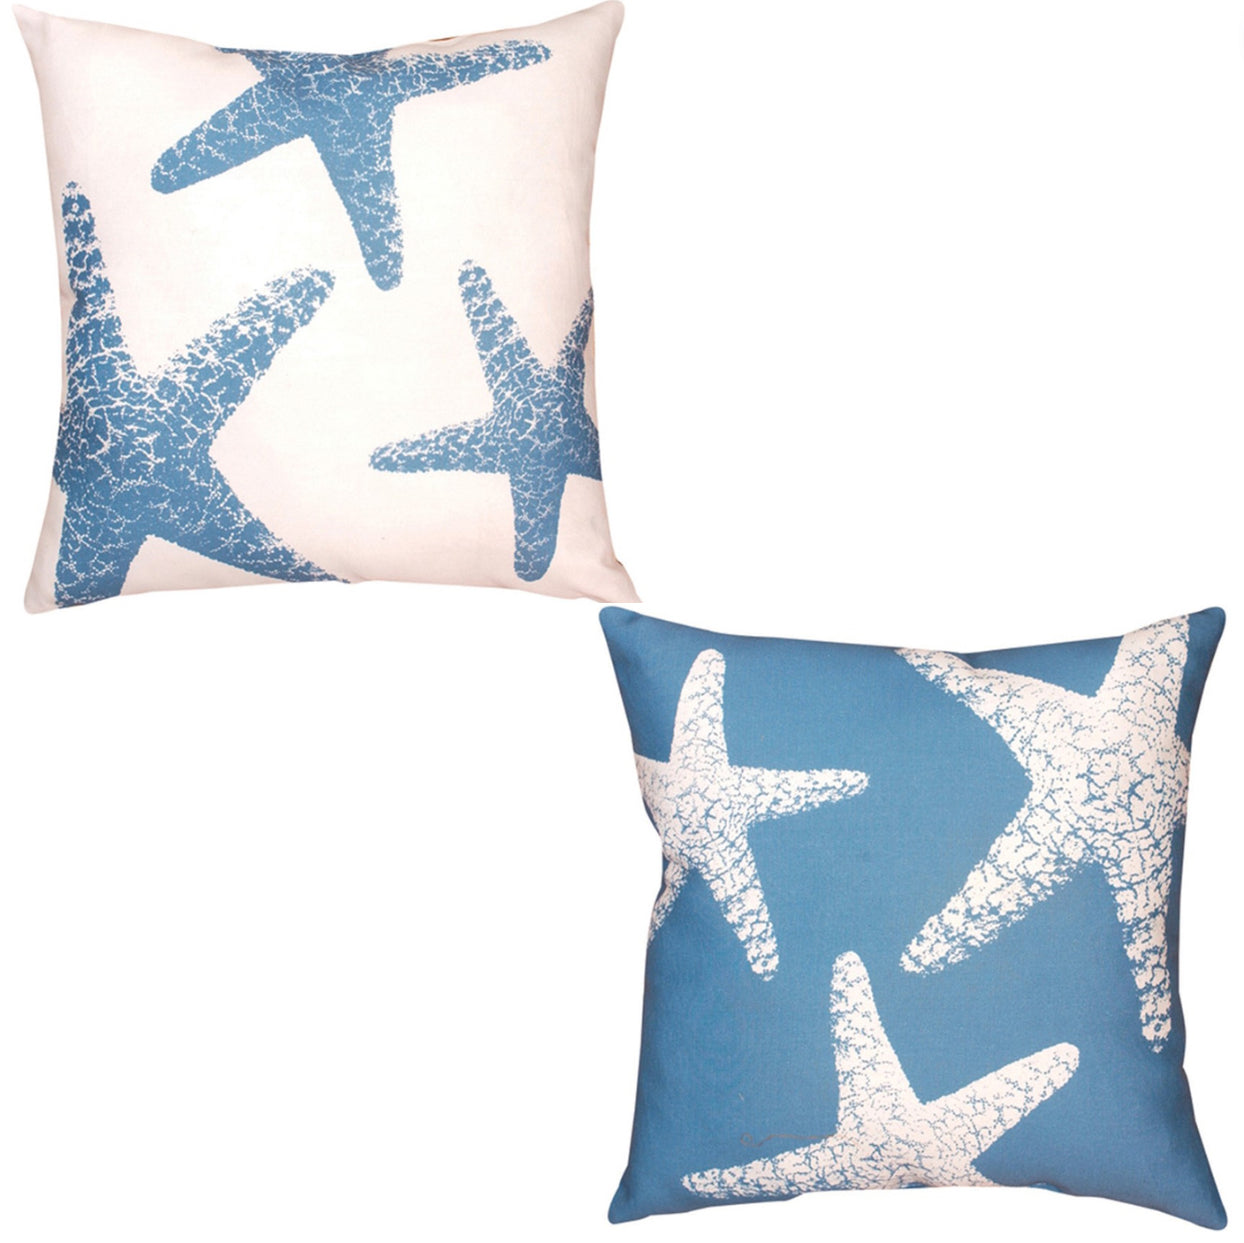 Set of 2 Nautical Starfish Climaweave Pillows